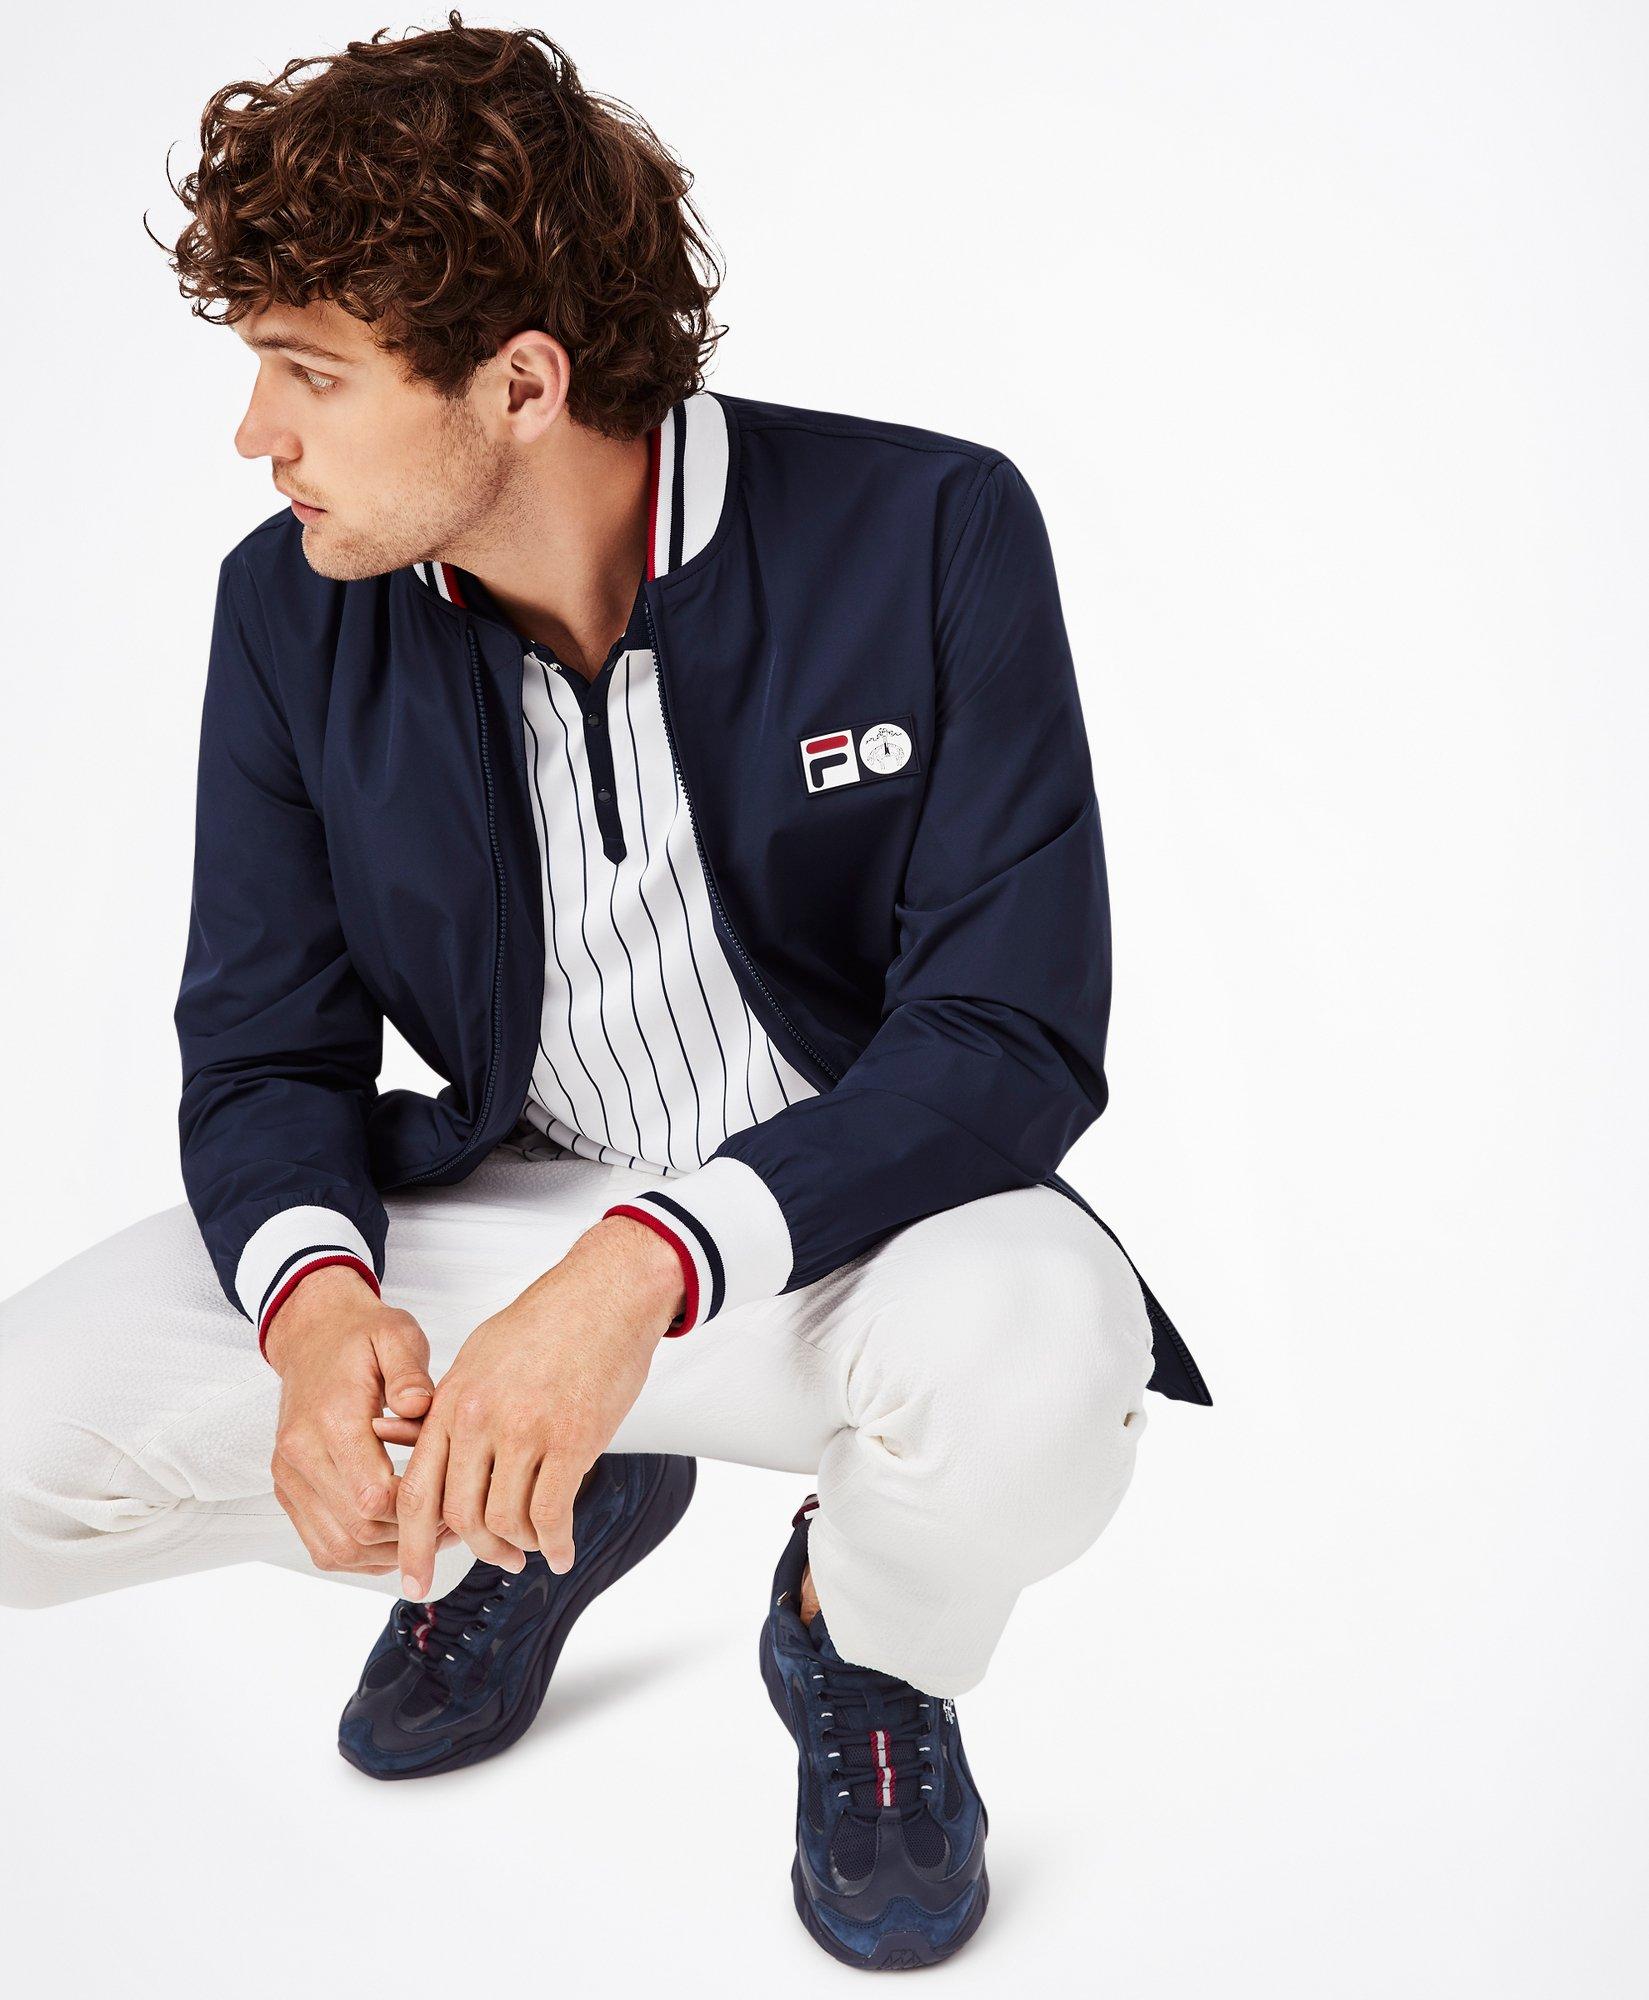 Brooks Brothers and FILA Collab Blends American Style with Tennis Gear